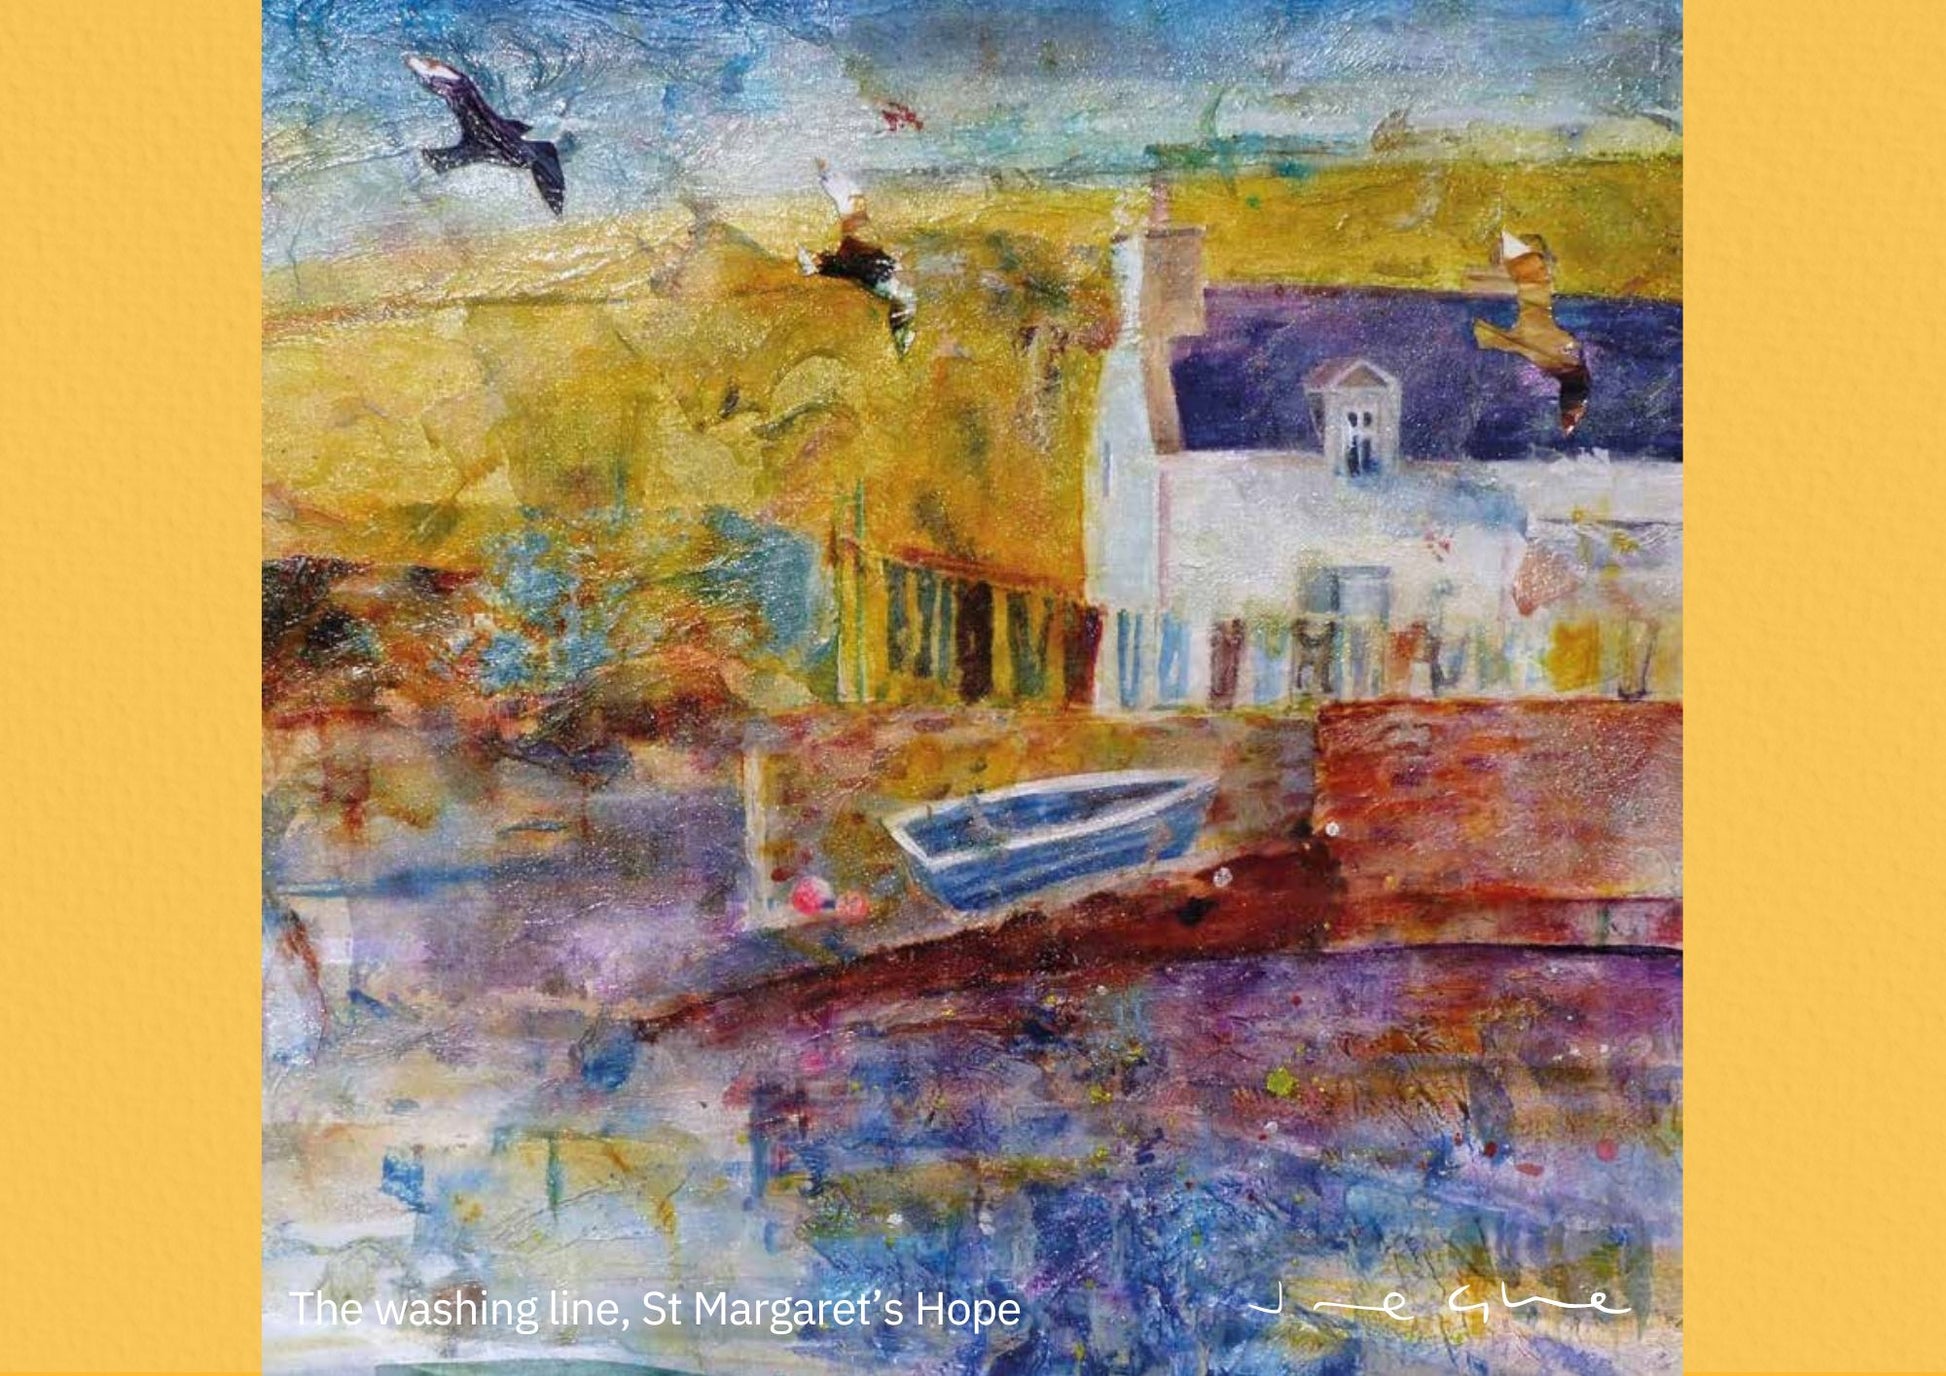 Orkney calendar 2025 mixed media painting of a house on the shoreline with washing line and boat at St MArgarets Hope by Orkney artist Jane Glue Scotland